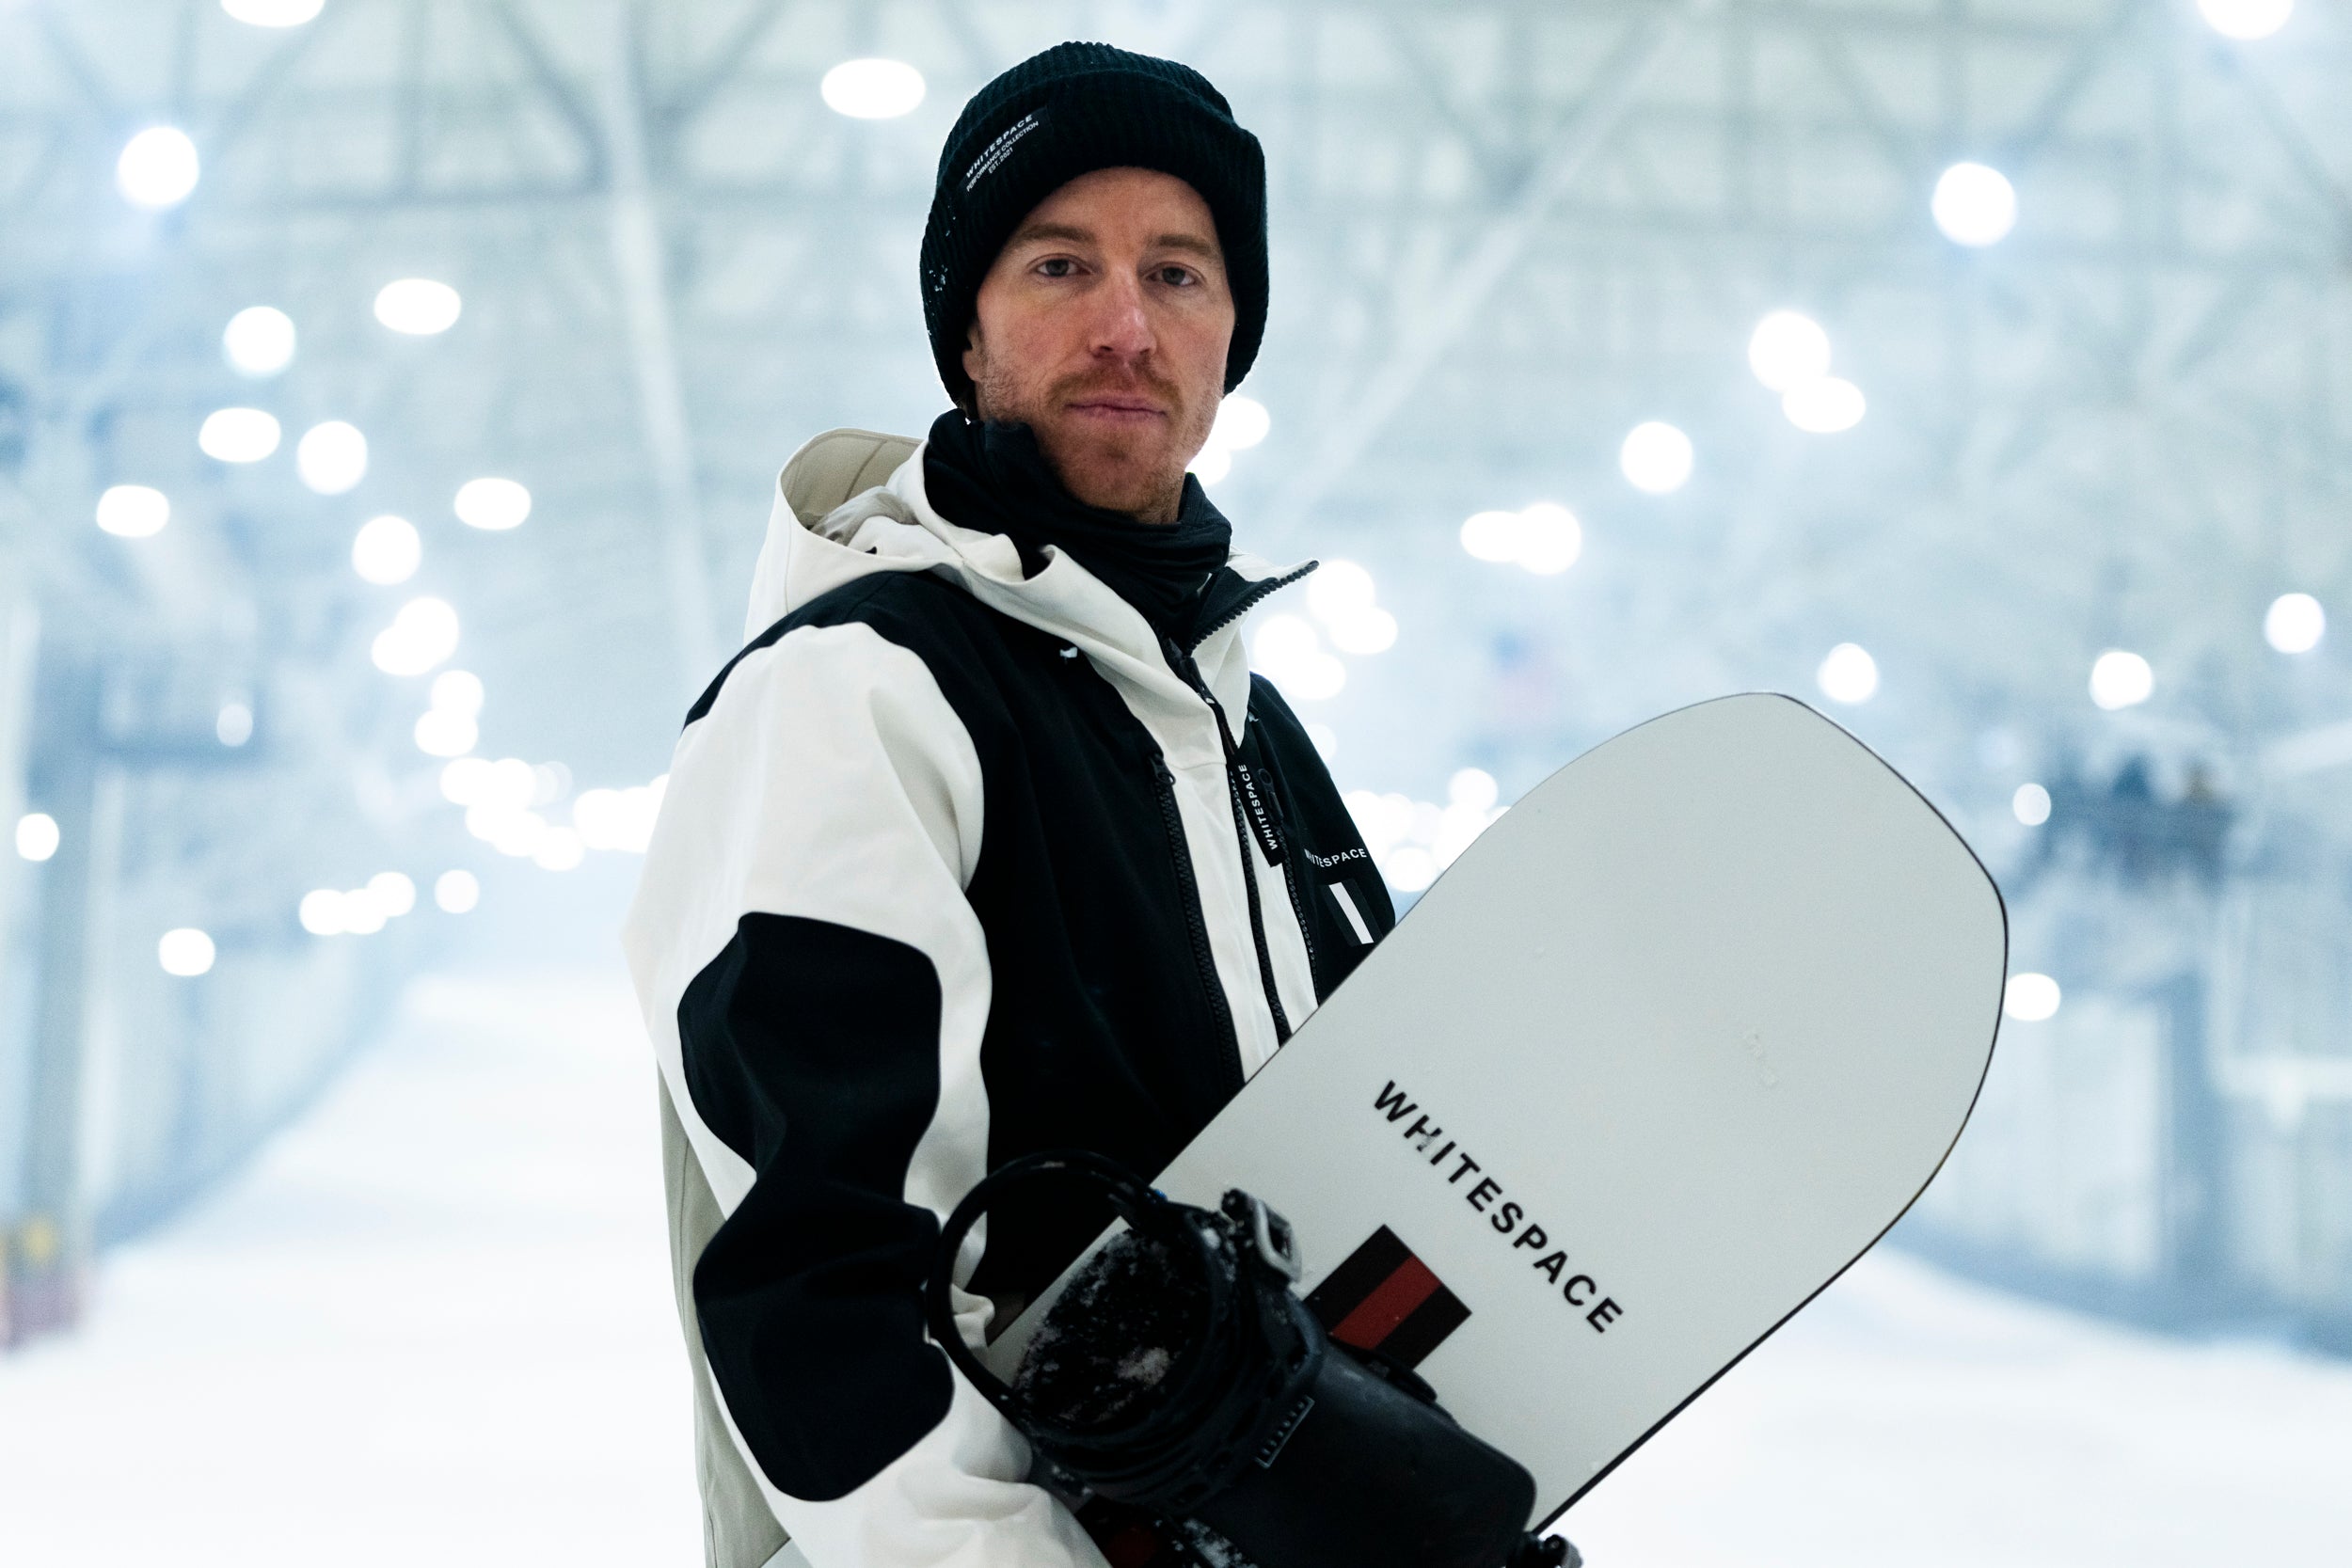 Shaun White wearing a black and white jacket along with the limited edition WHITESPACE x Shopify beanie while holding a snowboard from WHITESPACE.